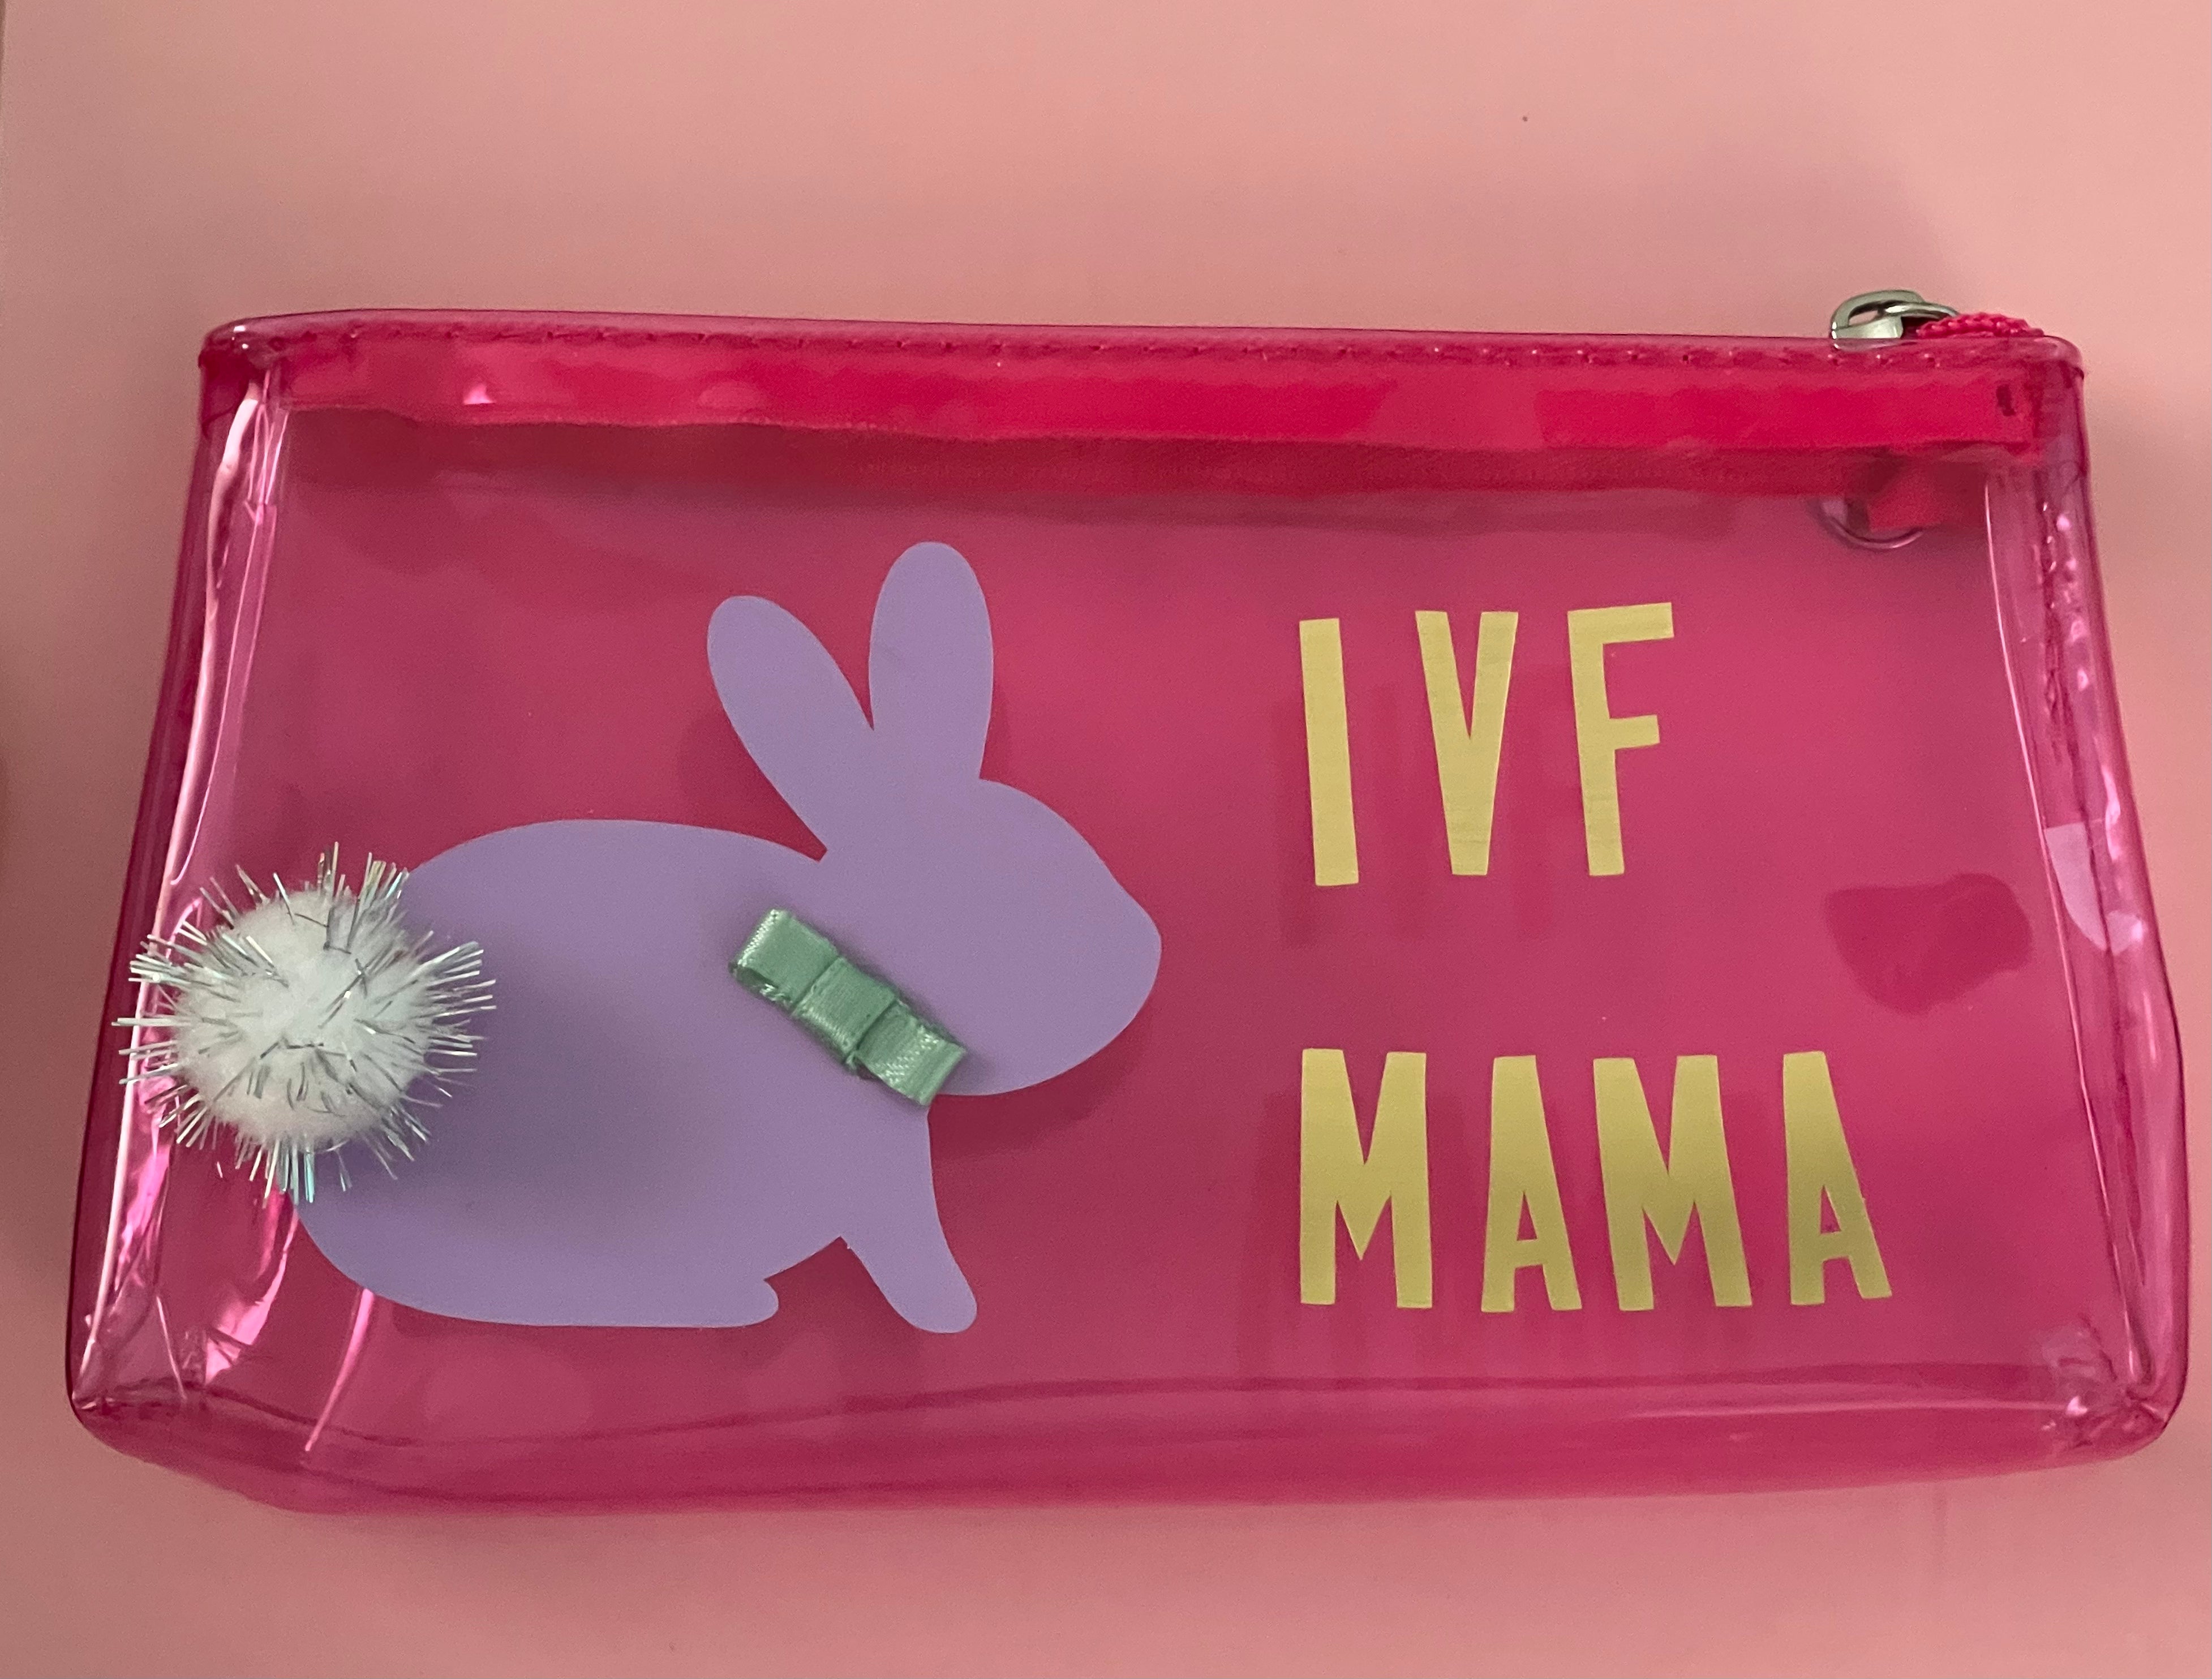 IVF Mama bunny pouch - Young Hugs